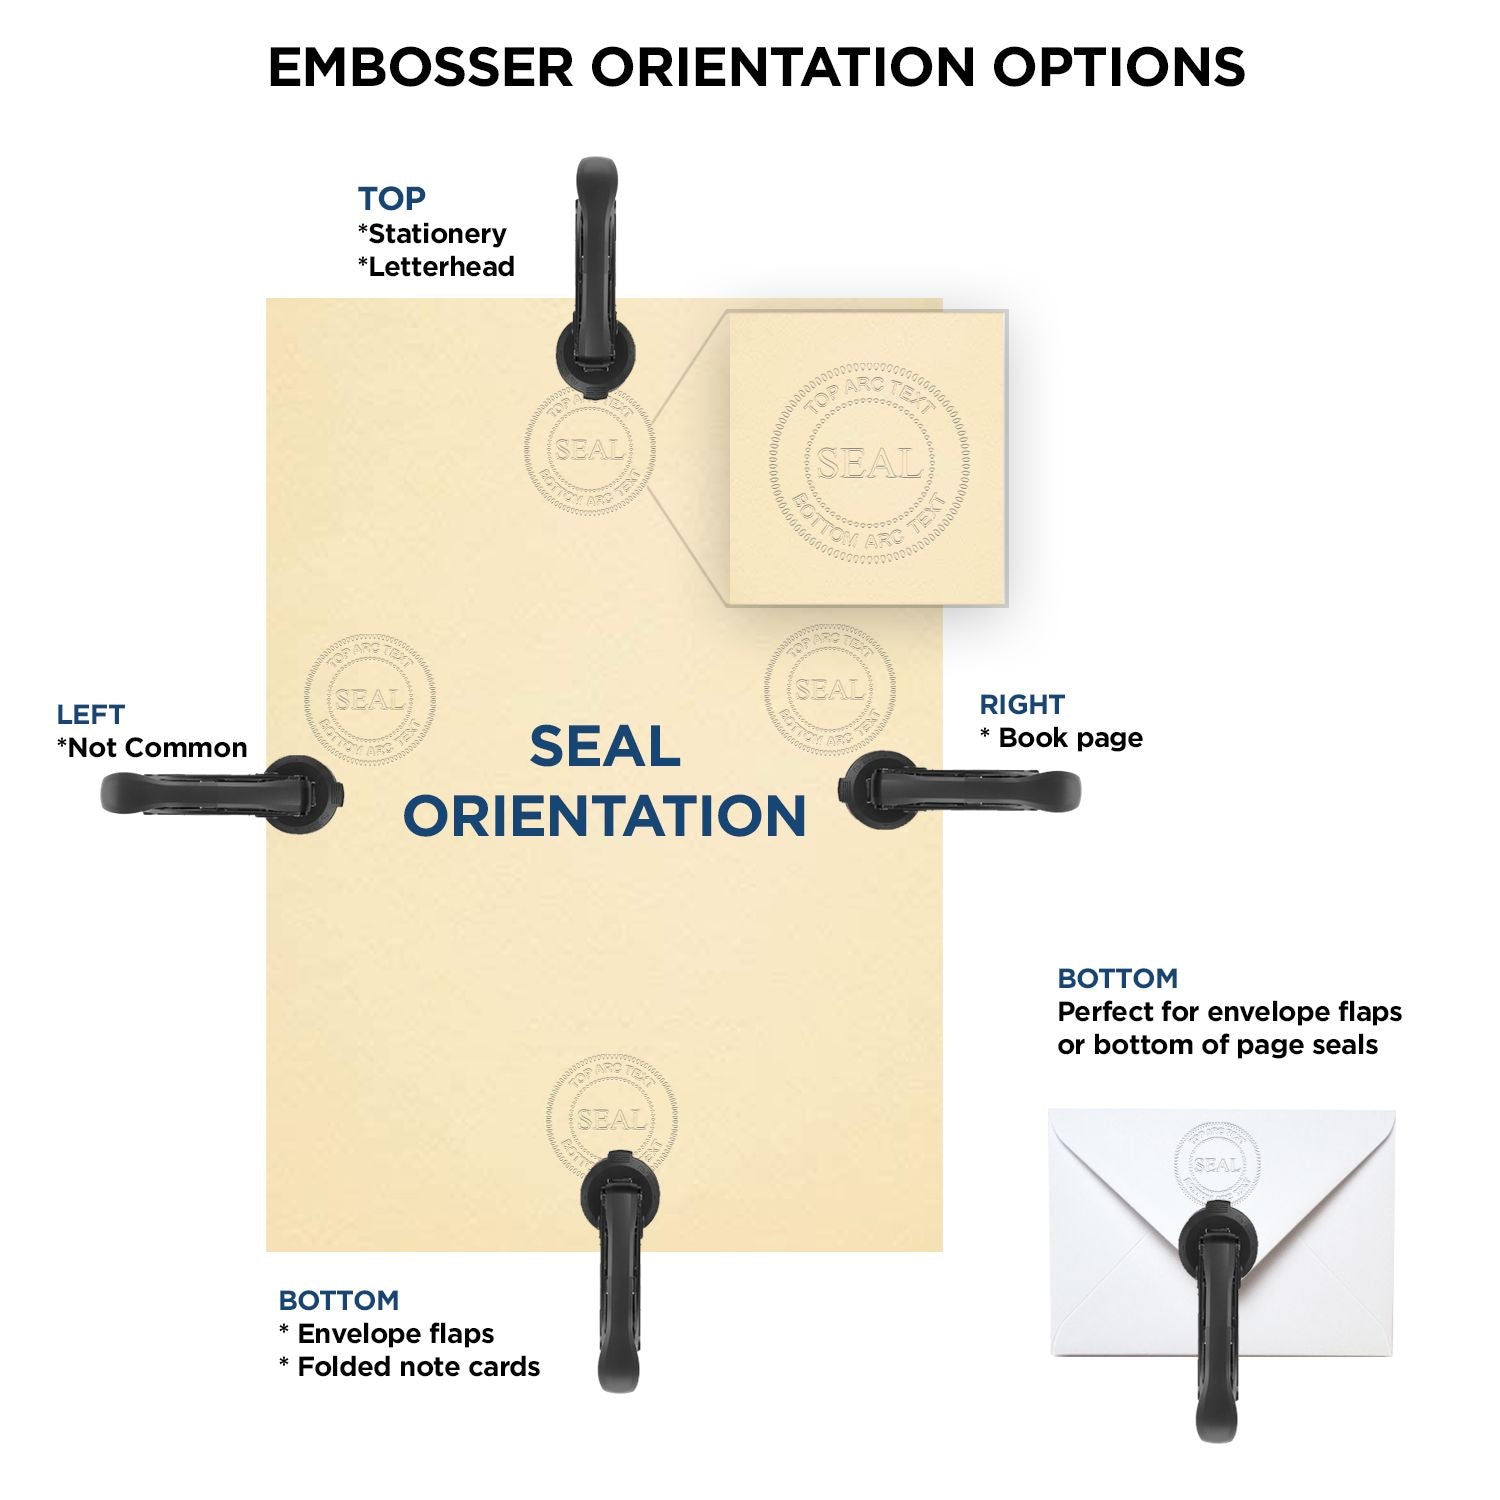 An infographic for the Long Reach Puerto Rico PE Seal showing embosser orientation, this is showing examples of a top, bottom, right and left insert.